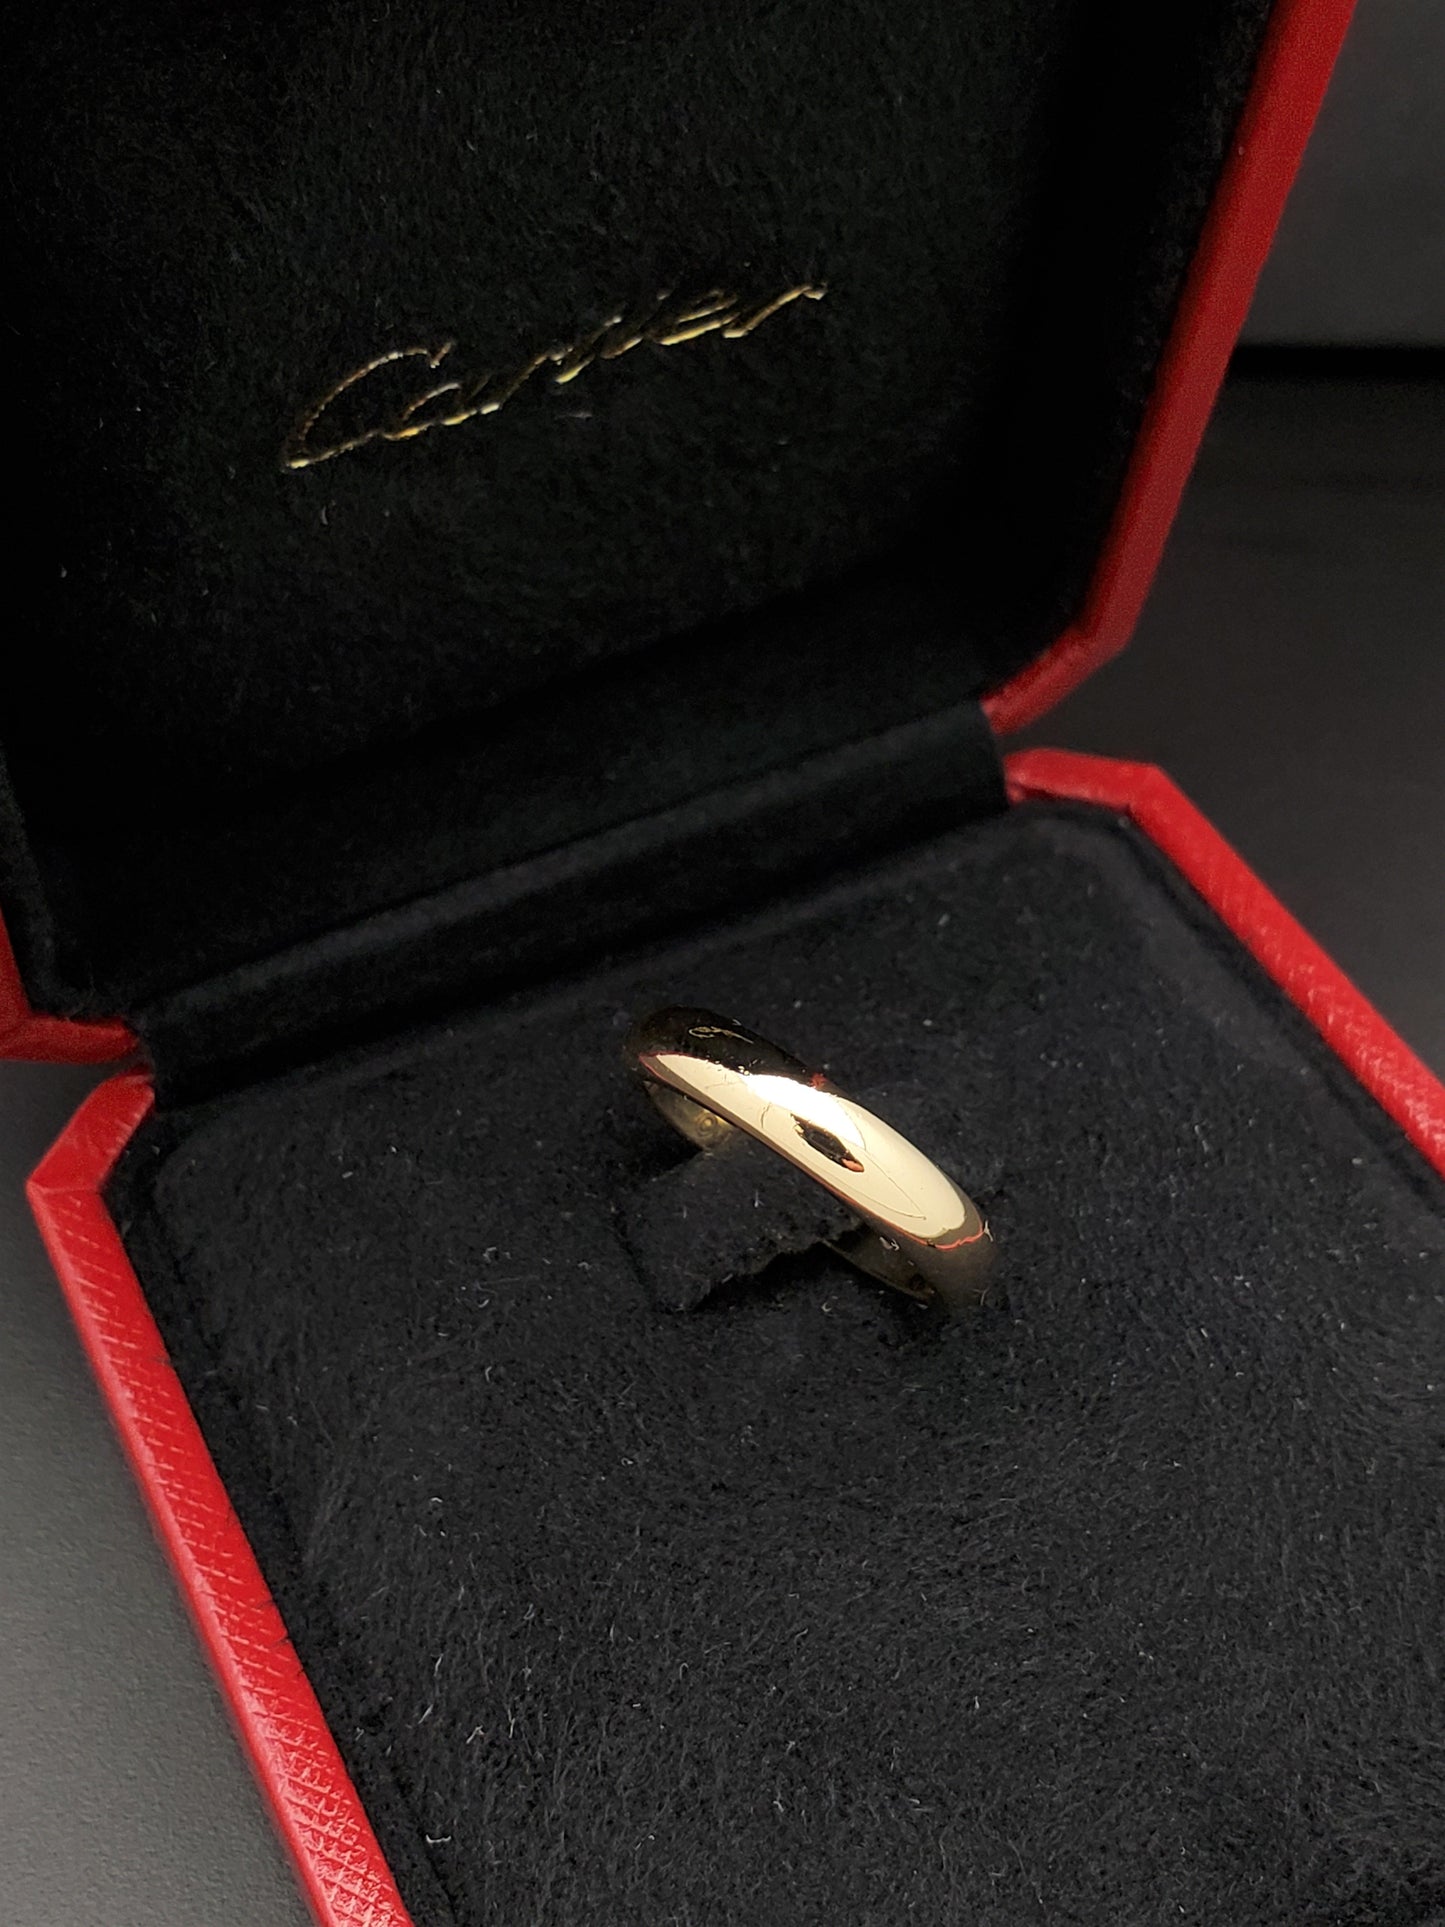 Cartier 18K Yellow Gold 4mm Wide Wedding Band Ring US Size 5.75 Euro Size 51